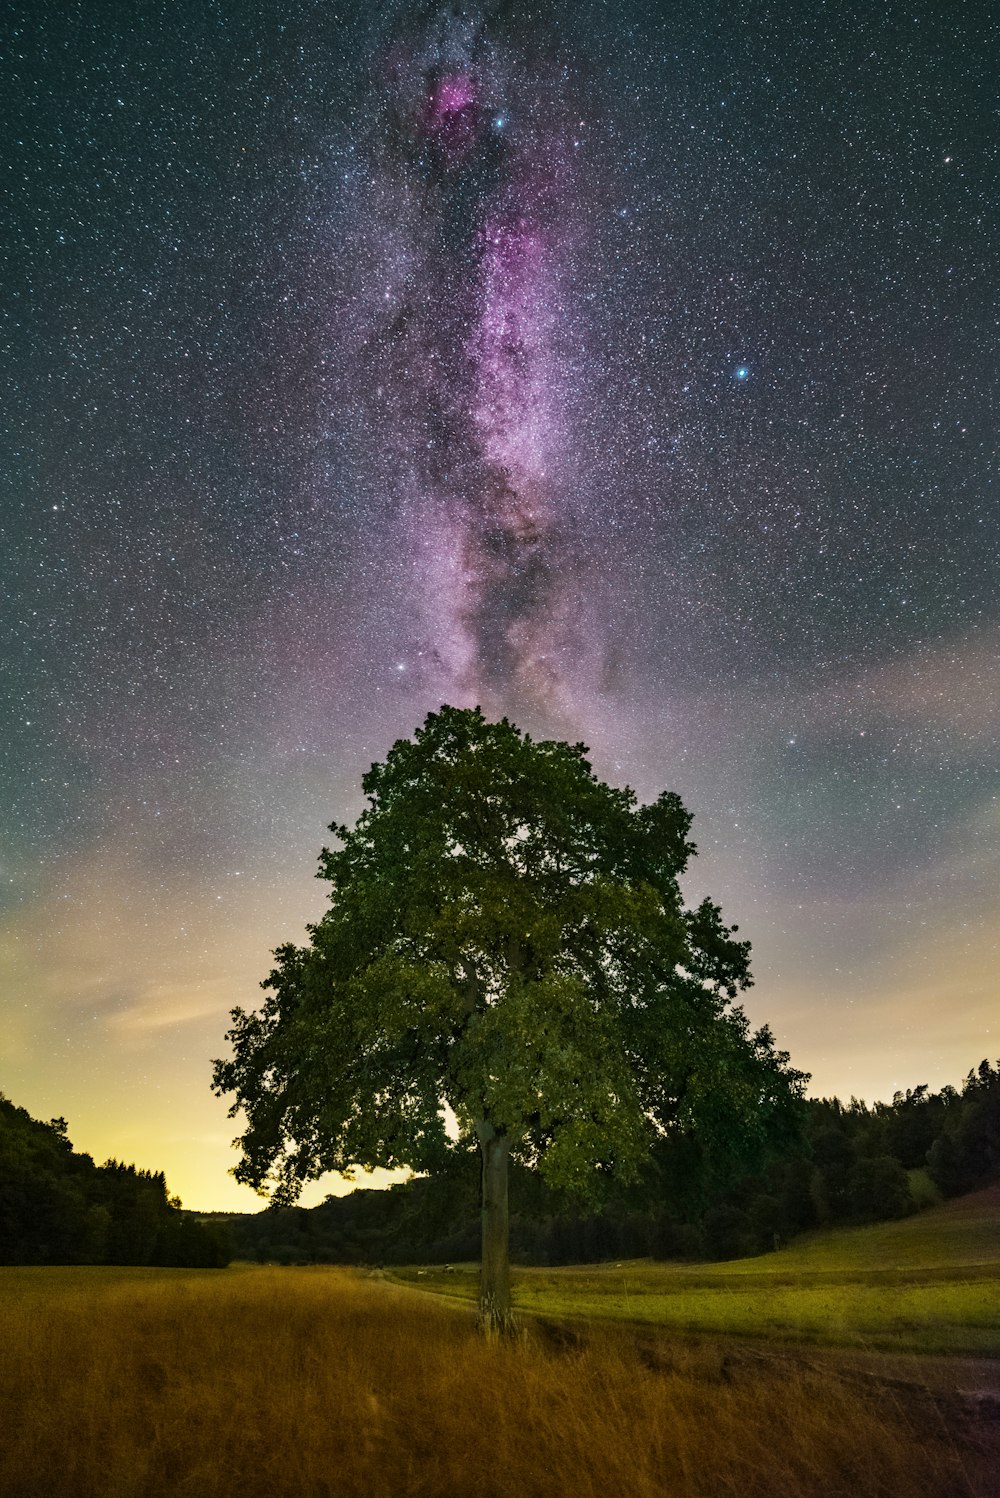 a tree in a field with stars in the sky